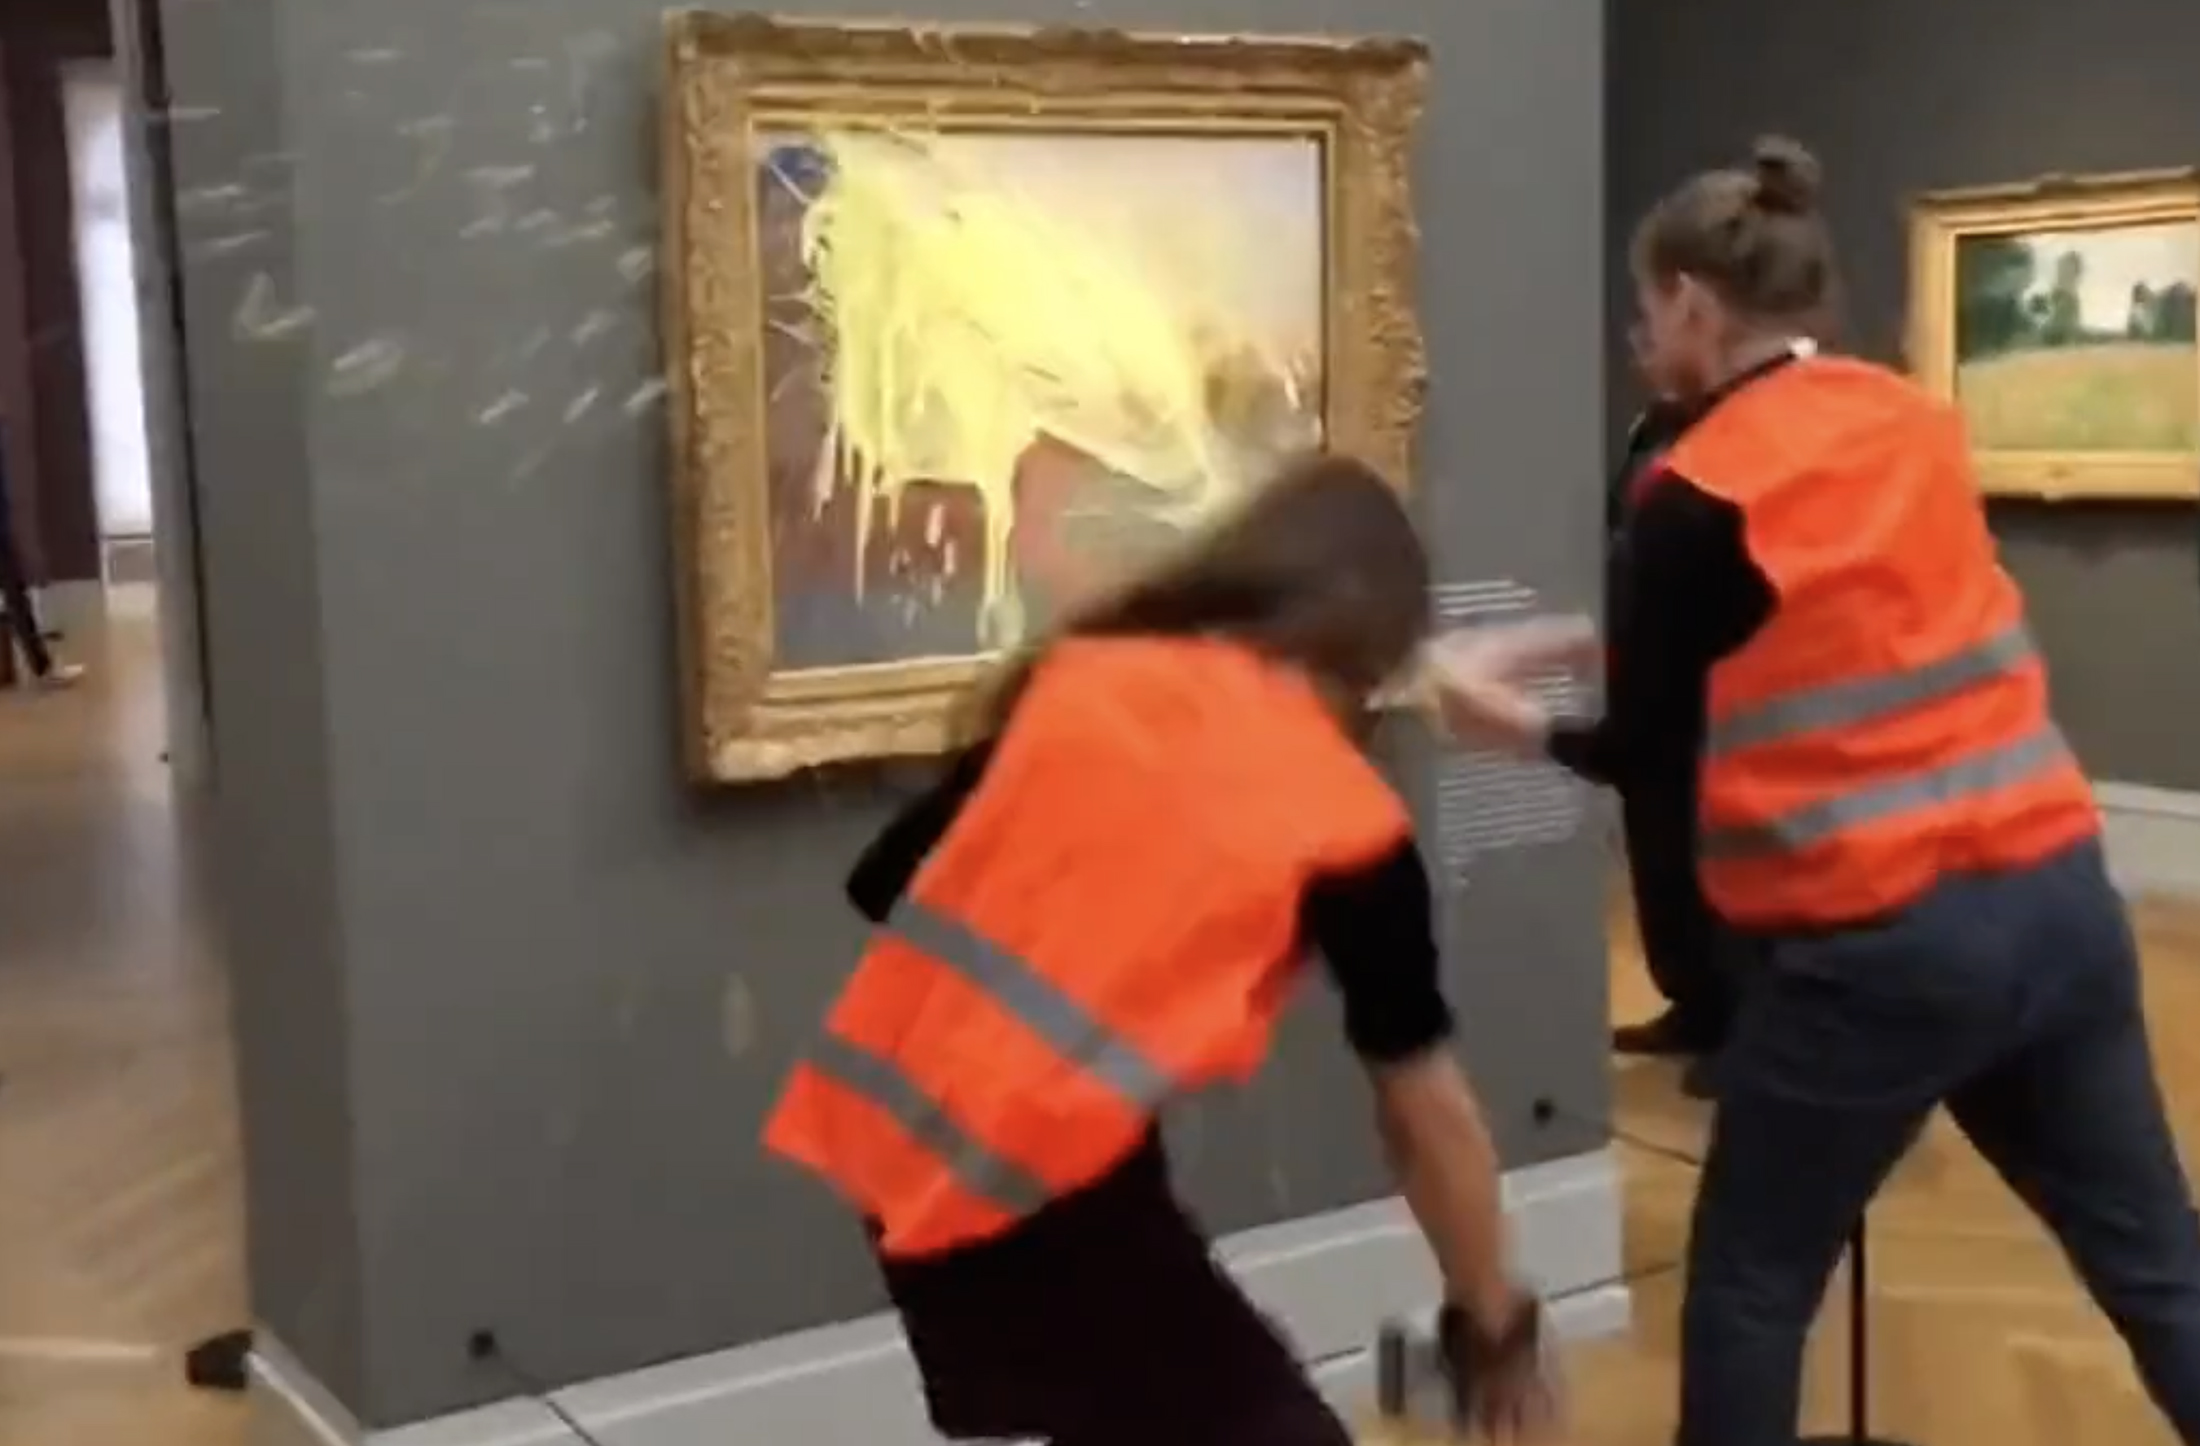 Last Generation climate protesters throw mashed potatoes at a Claude Monet painting in&nbsp;the Barberini Museum on Oct. 23.